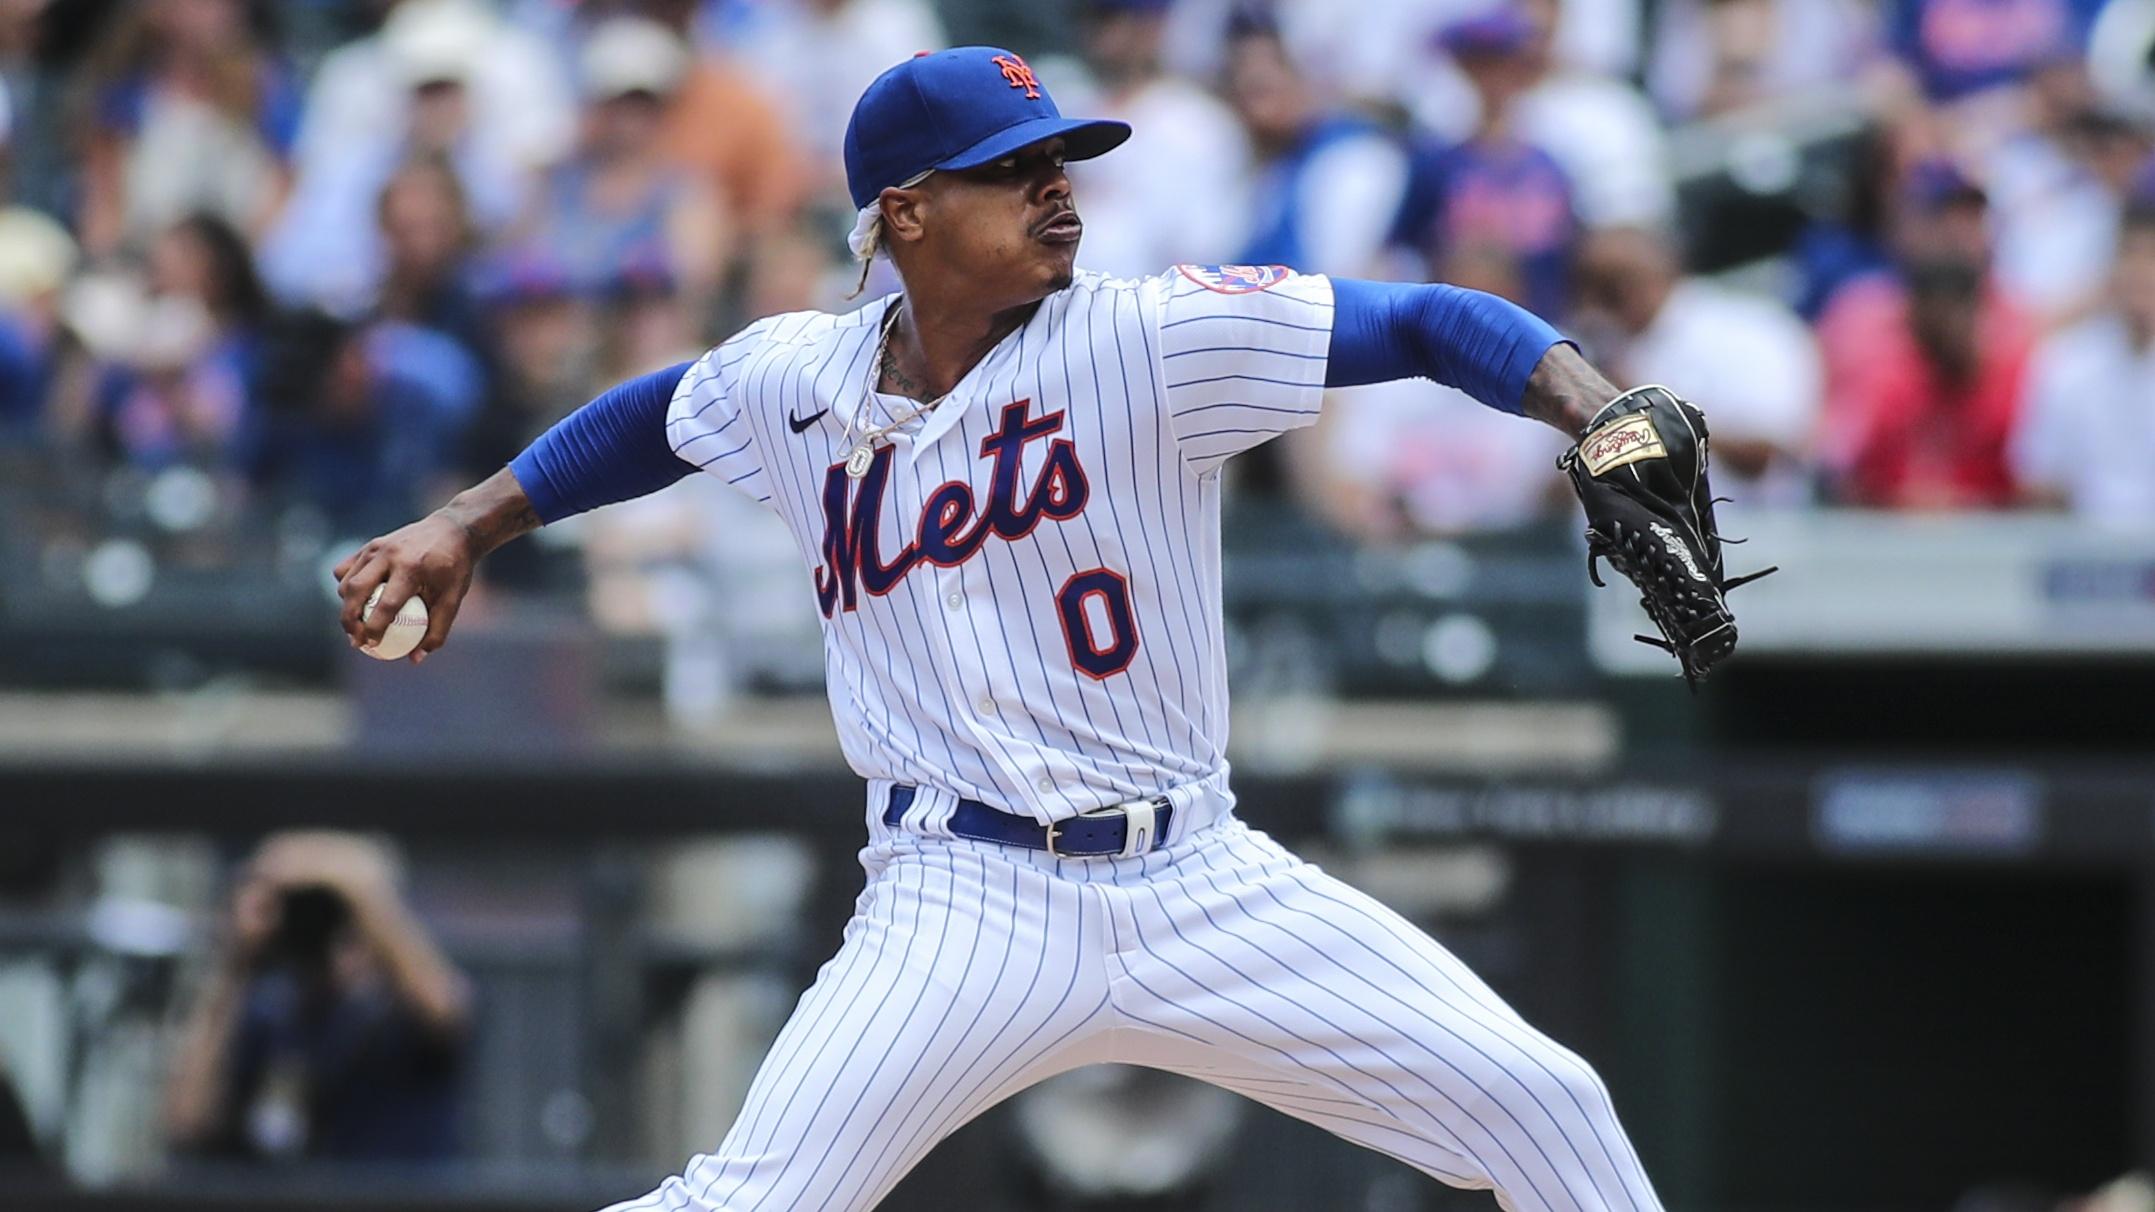 Jun 27, 2021; New York City, New York, USA; New York Mets pitcher Marcus Stroman (0) pitches in the first inning against the Philadelphia Phillies at Citi Field. / © Wendell Cruz-USA TODAY Sports